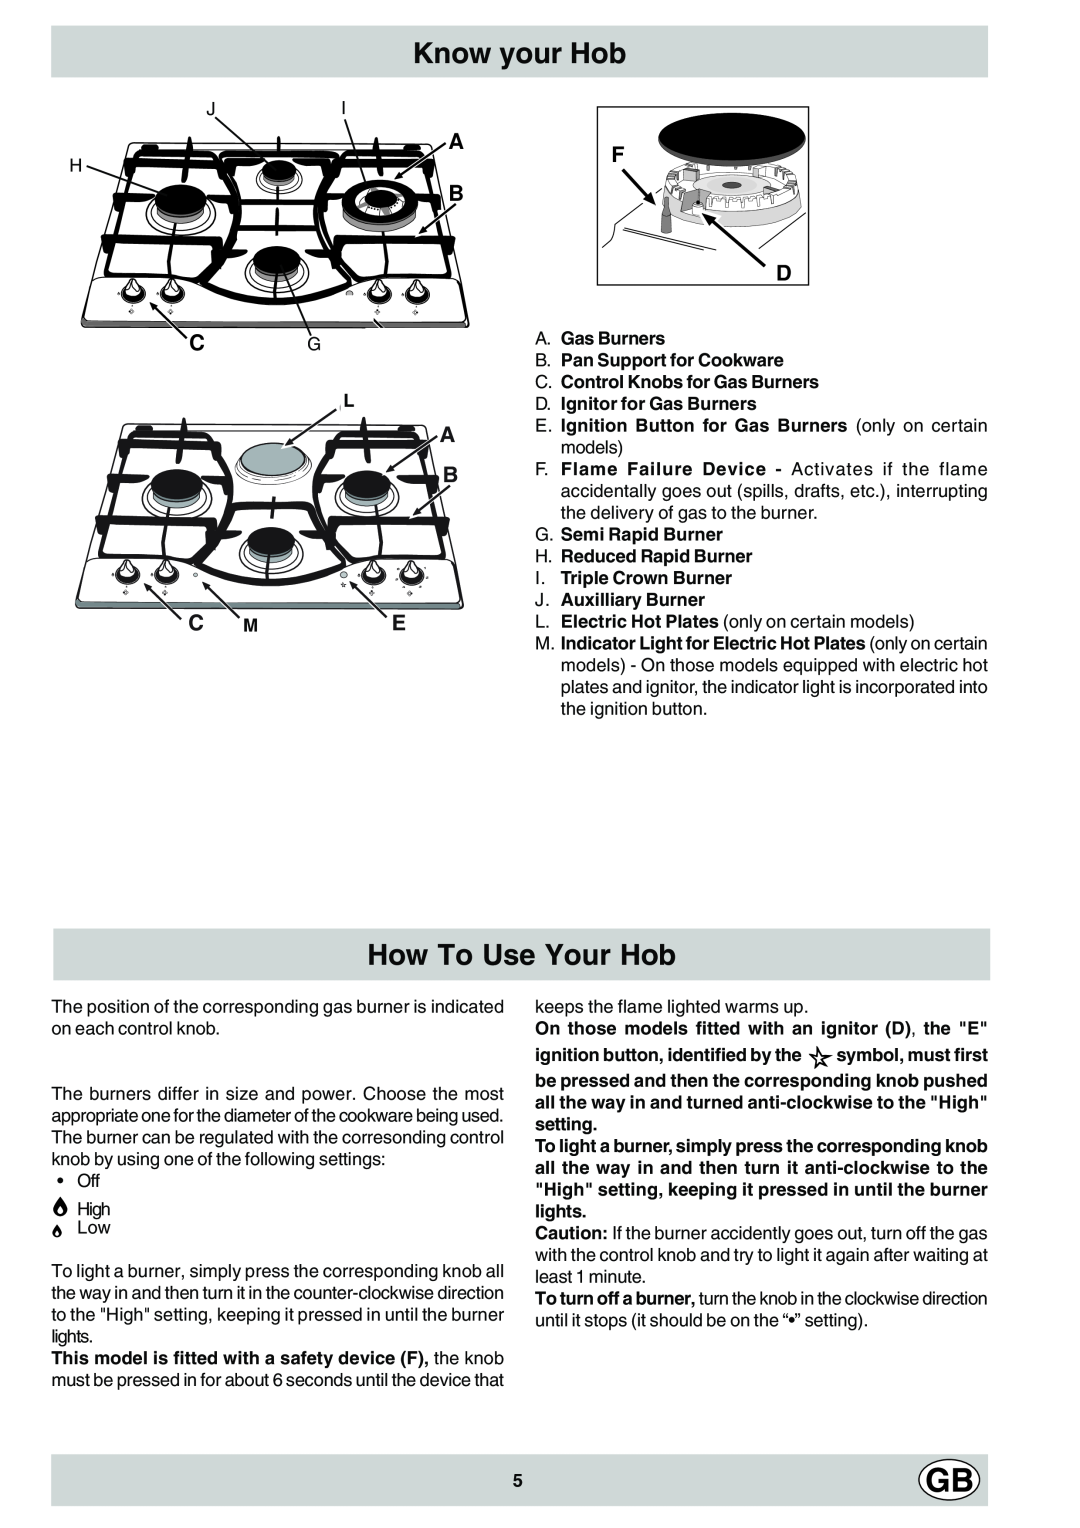 Hotpoint GF640, GF641 manual Know your Hob, How To Use Your Hob 